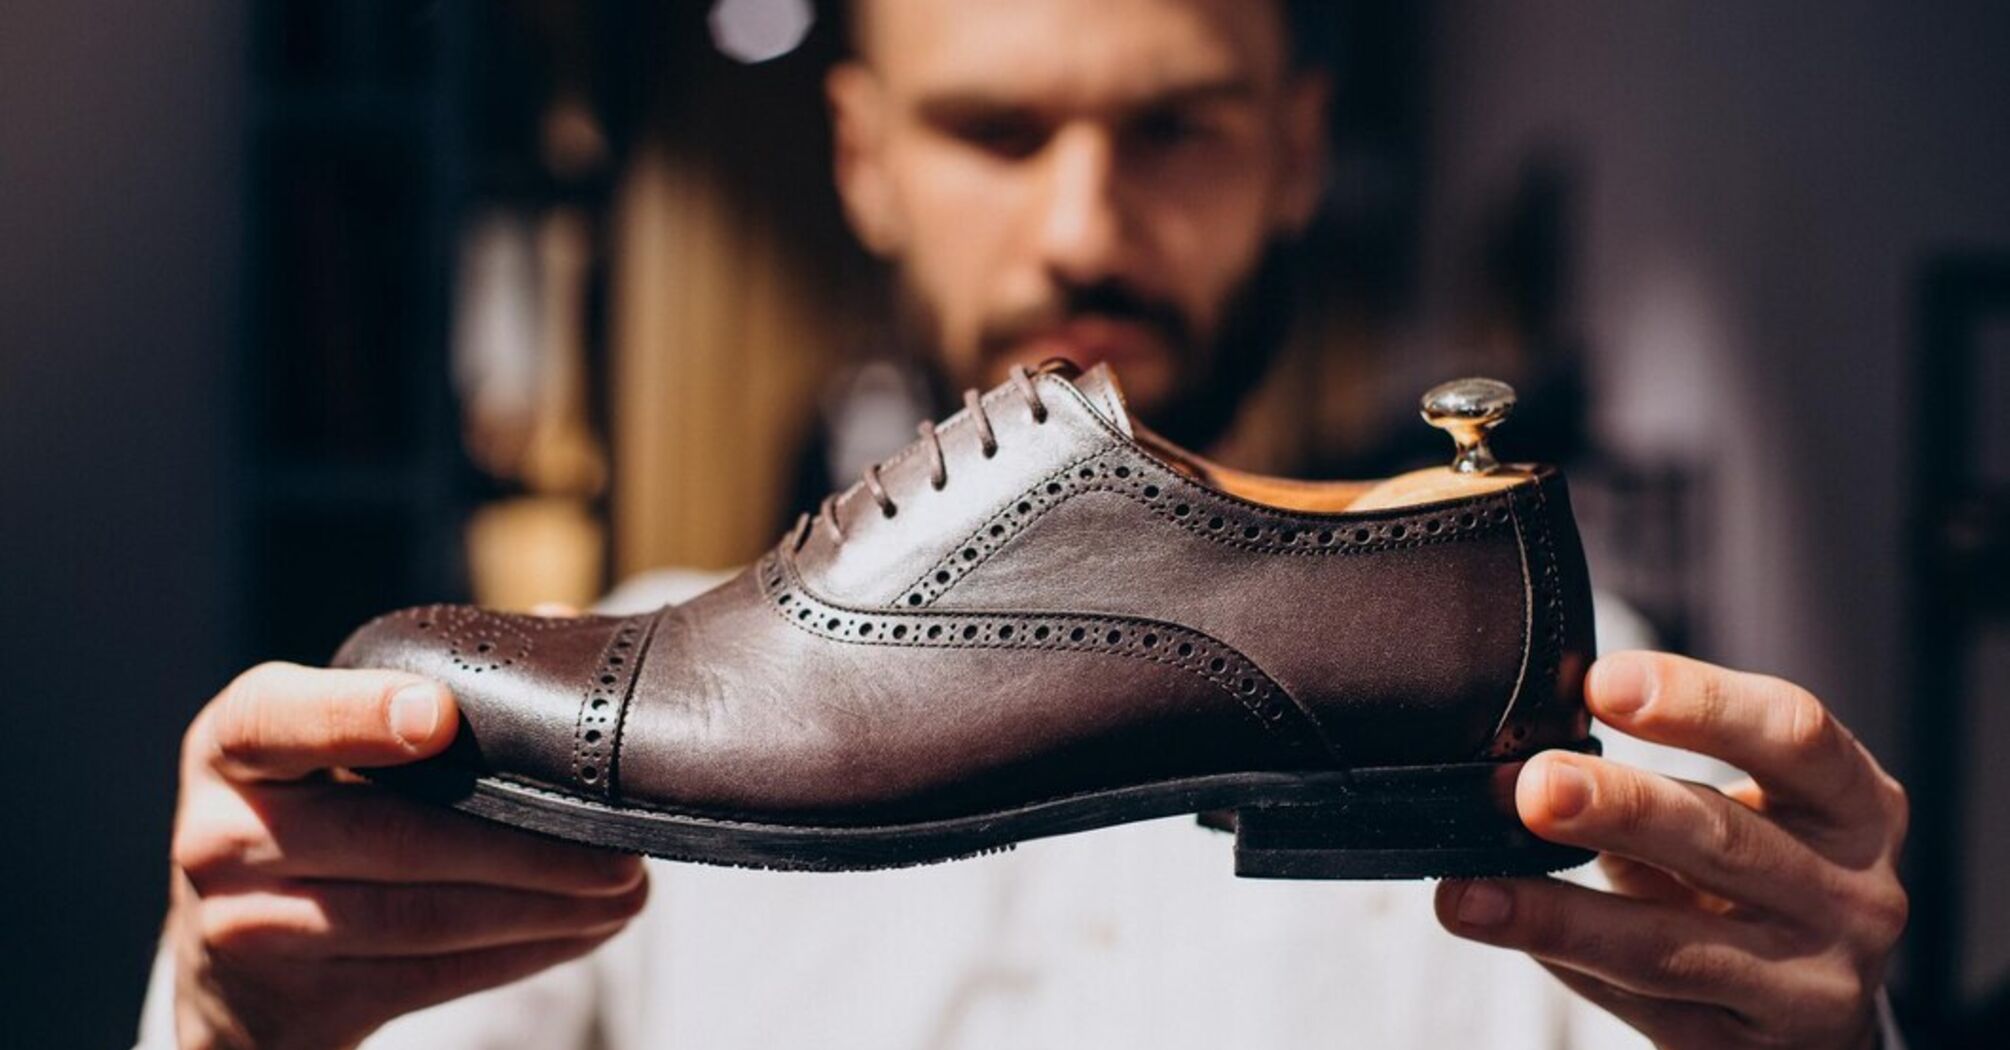 How to properly care for leather shoes: Useful tips